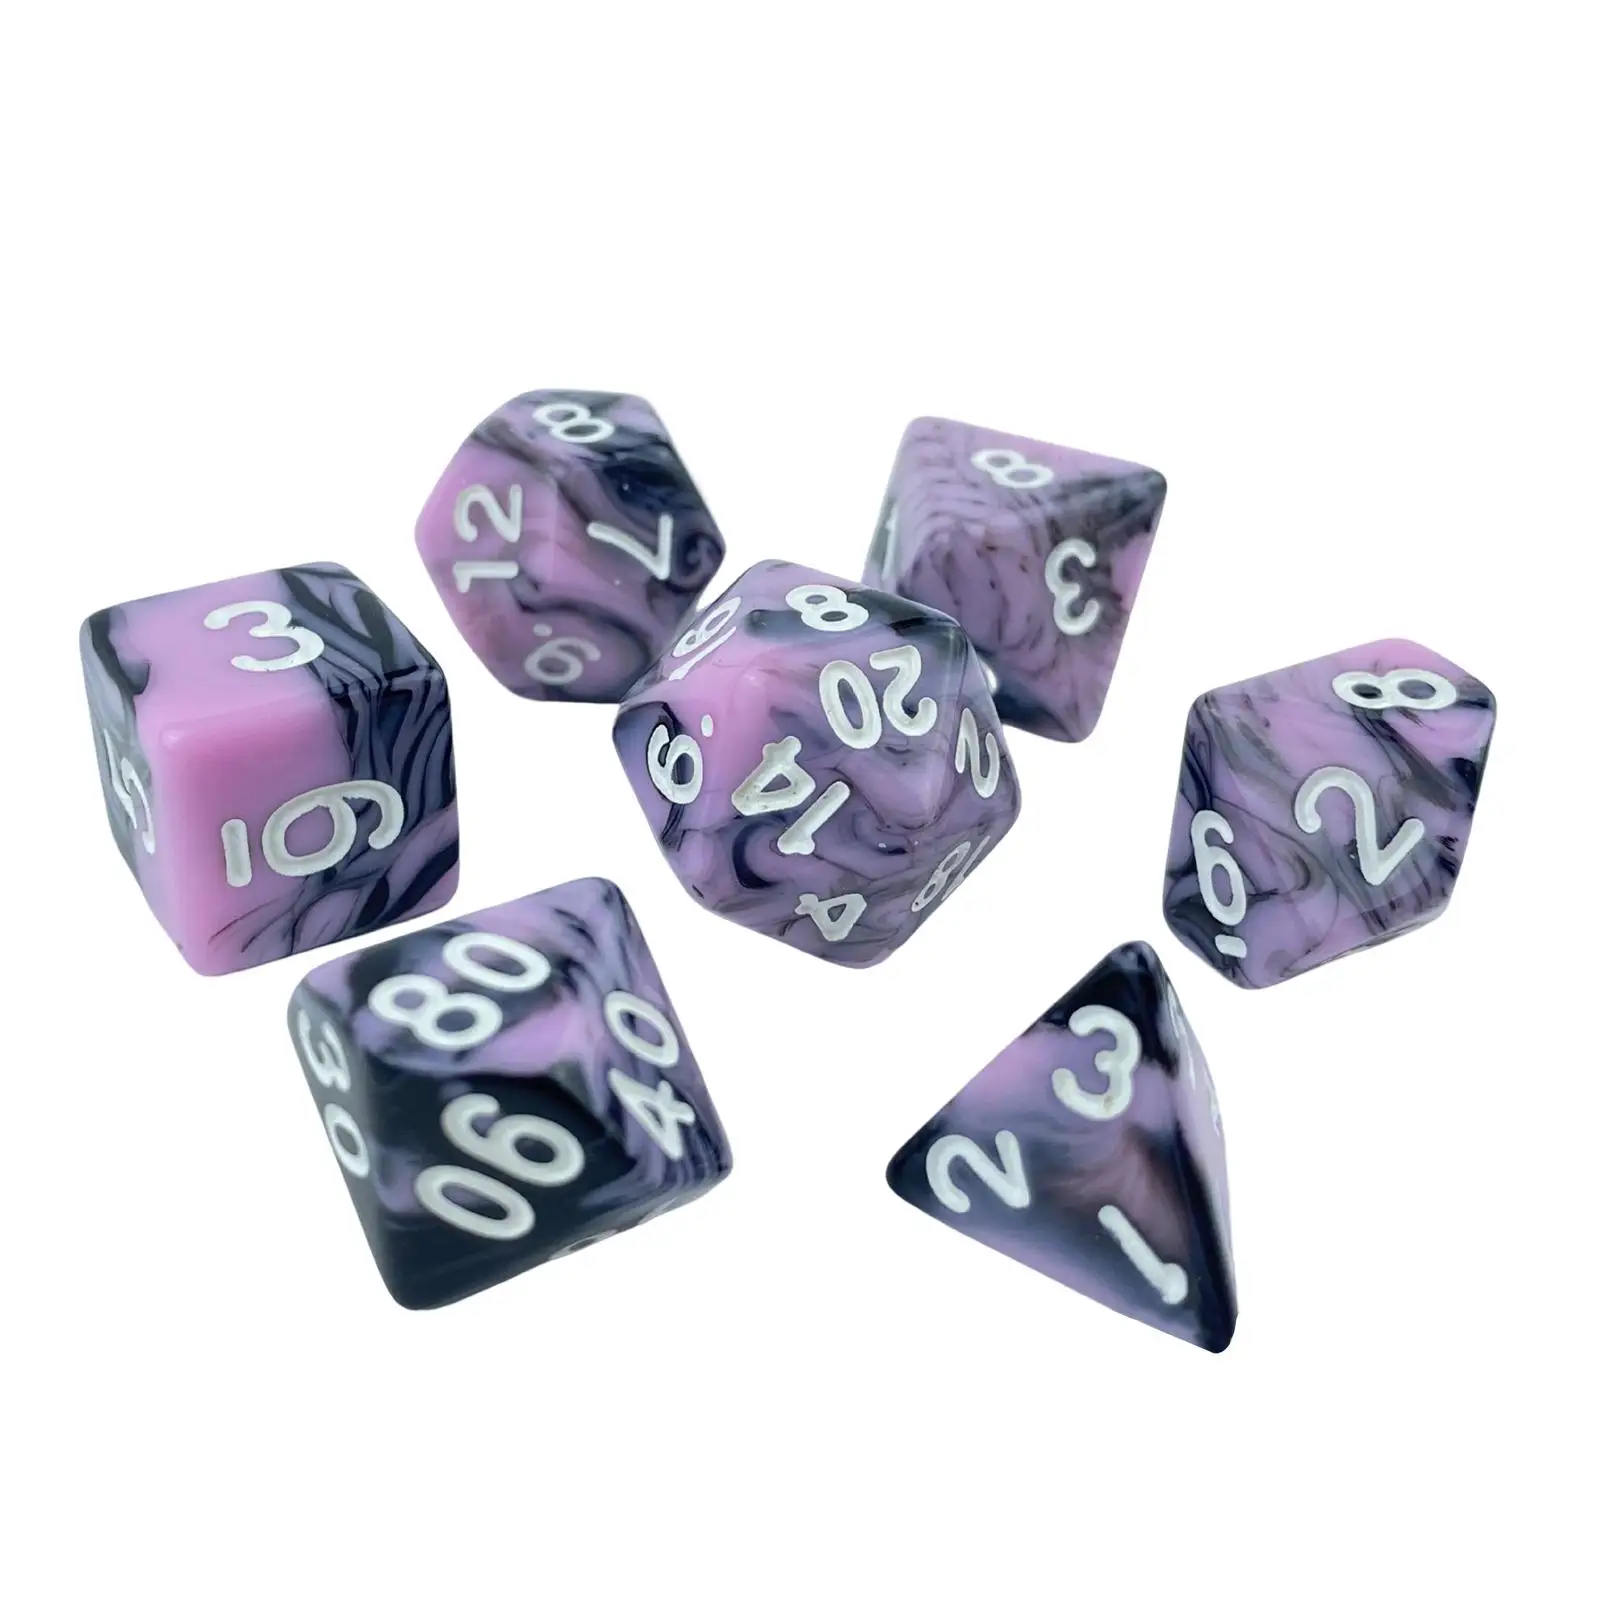 49Pcs Engraved Polyhedral Dices Set D4 D6 D8 D10 D12 D20 Puzzle Games Craft for Role Playing Board Games KTV Parties Props